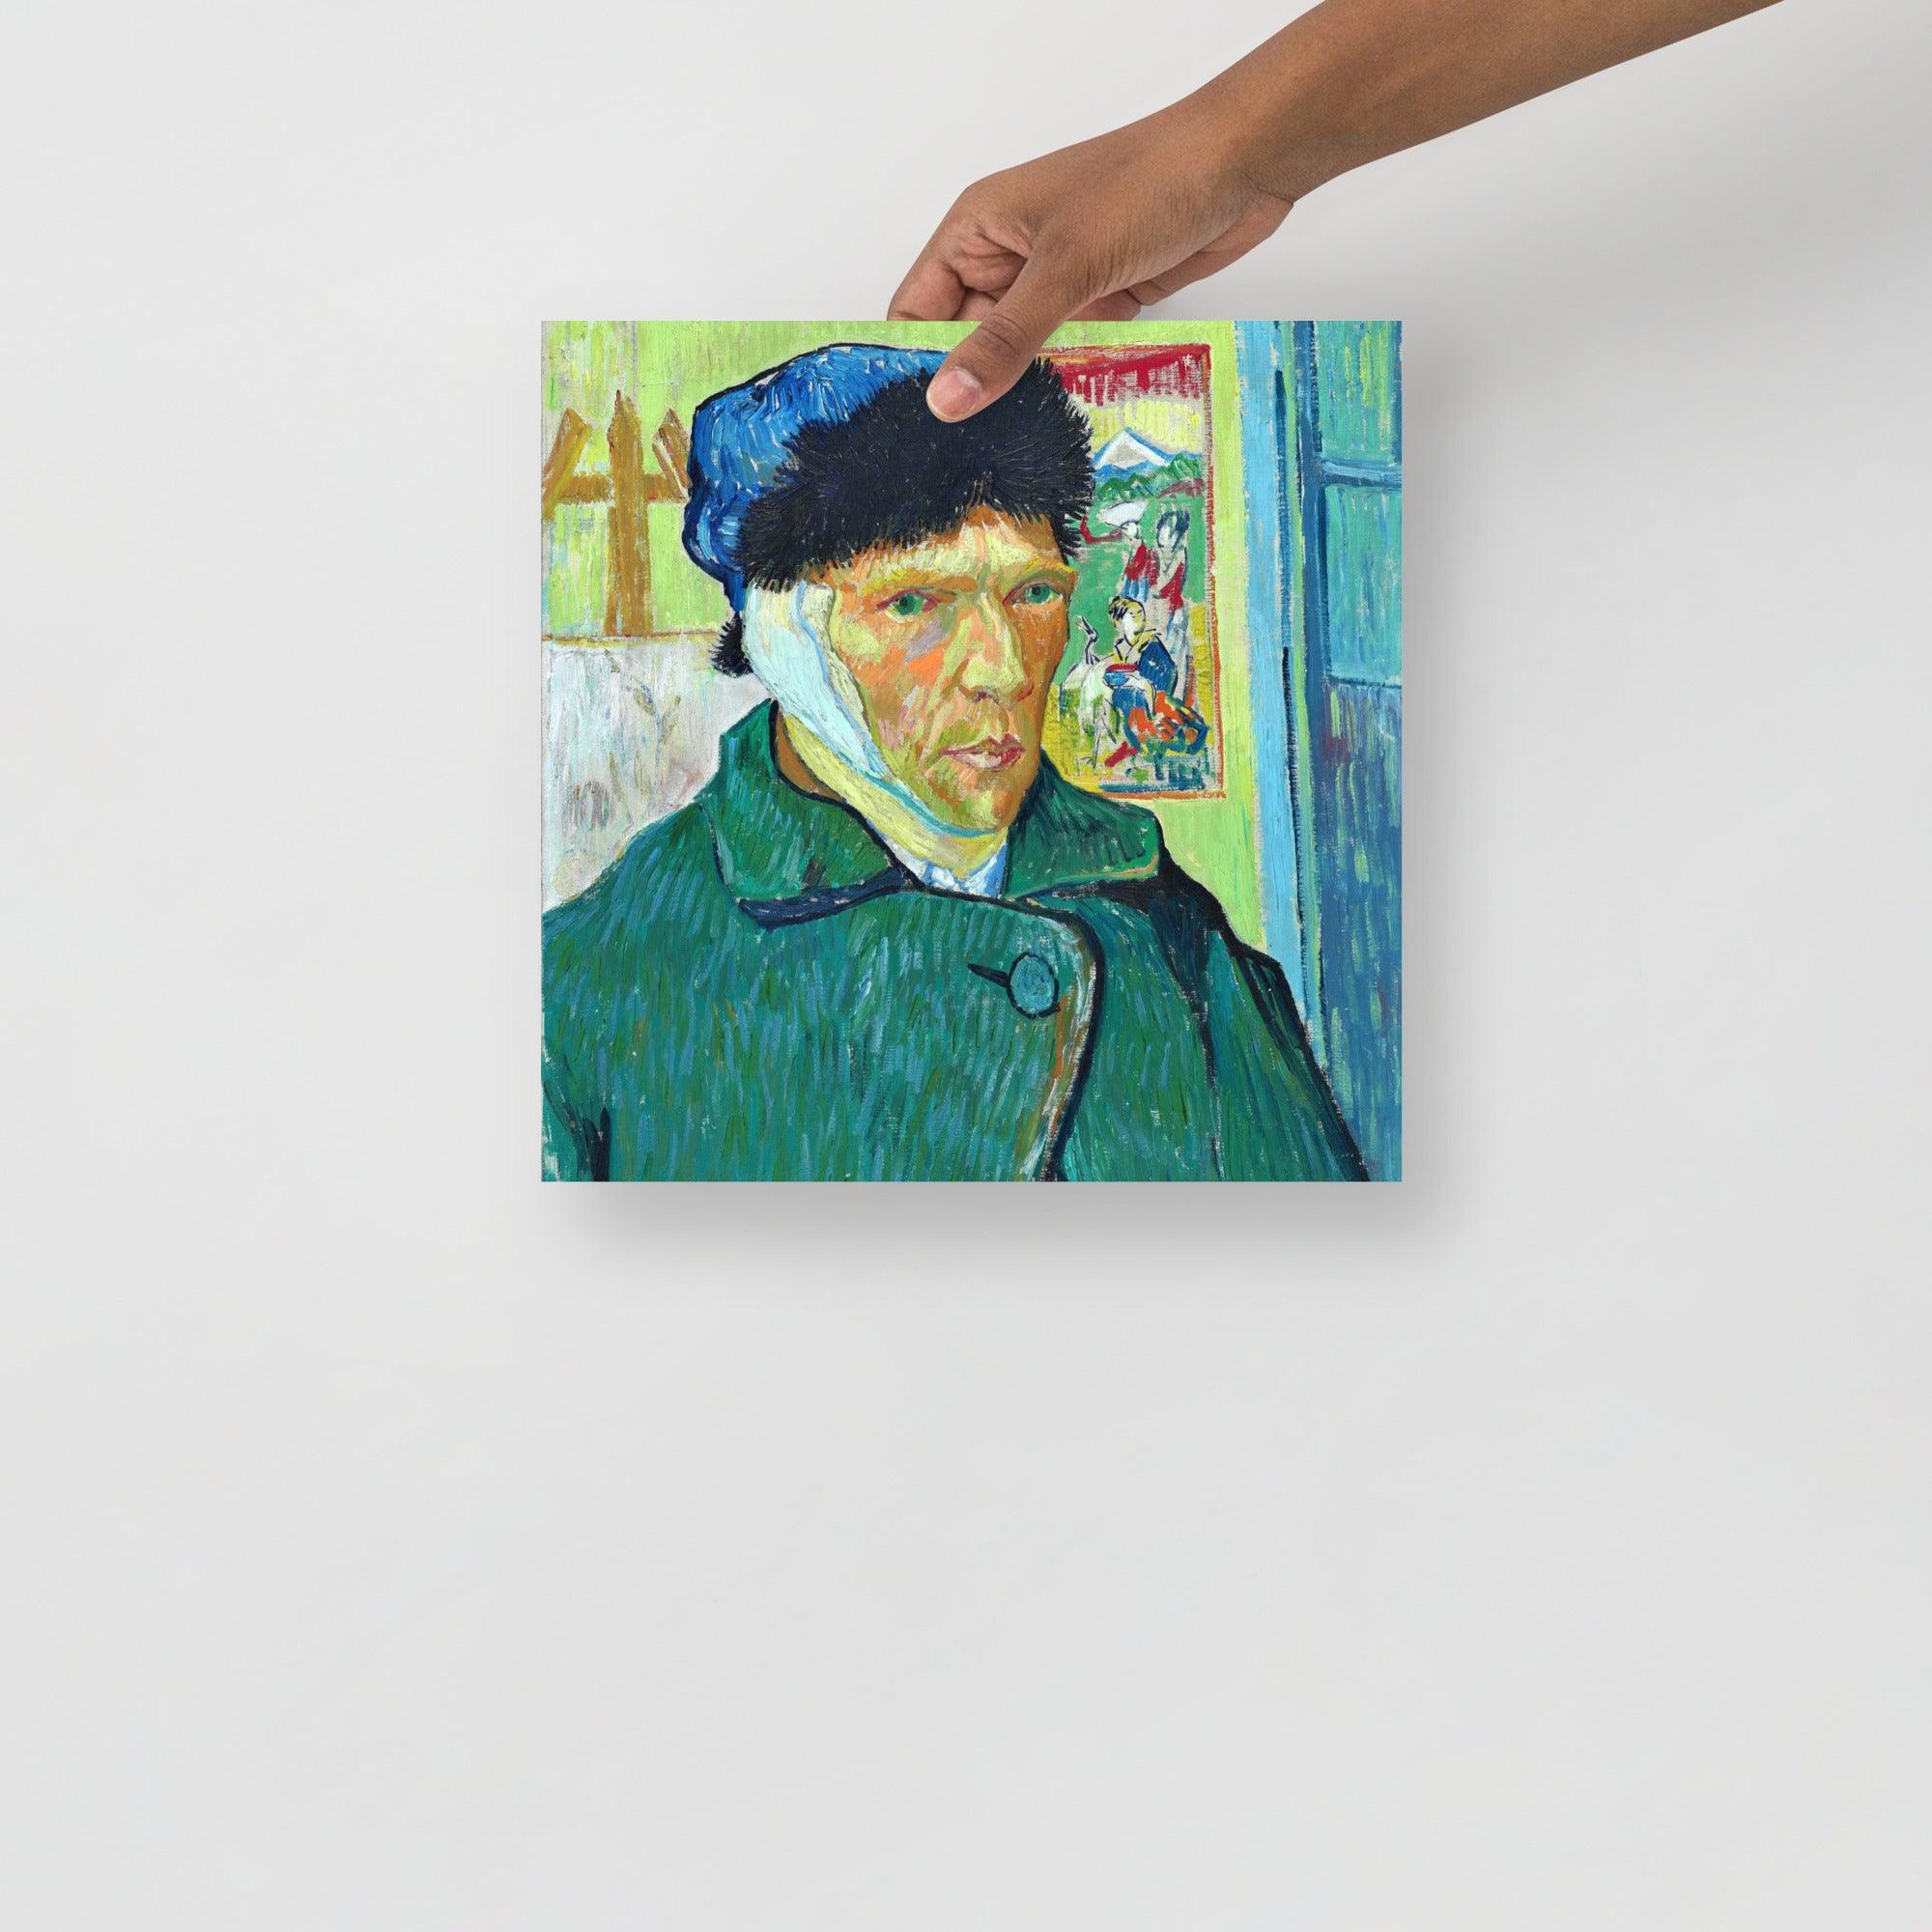 A Self Portrait With Bandaged Ear by Vincent Van Gogh poster on a plain backdrop in size 12x12”.